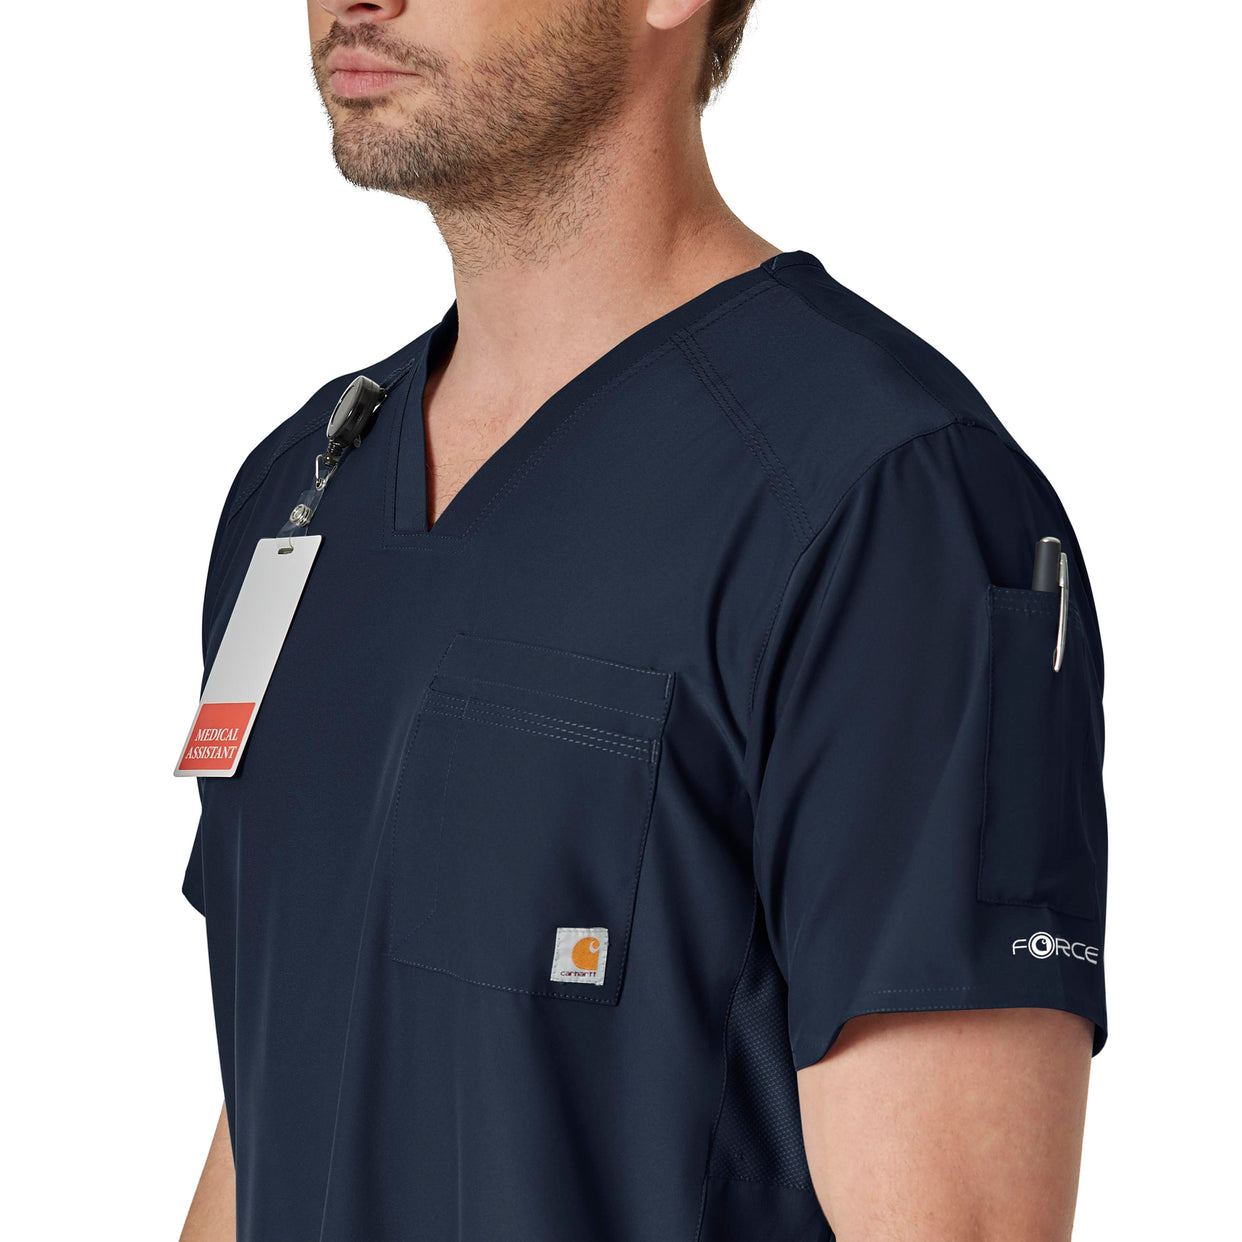 Force Liberty Men's Twill Chest Pocket Scrub Top Navy side view